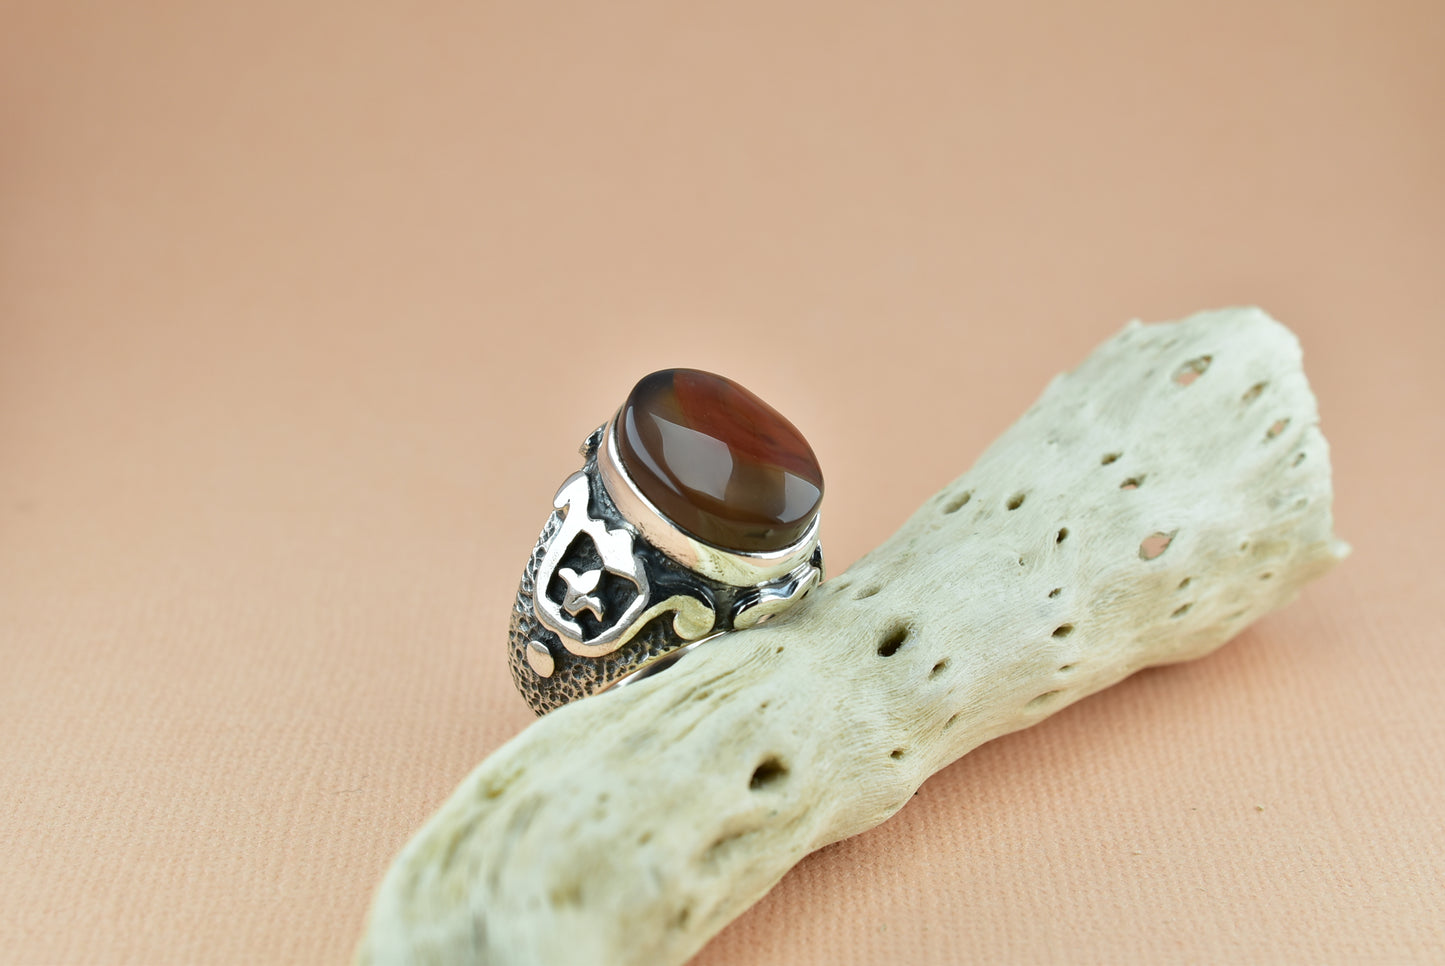 Agate Silver Ring